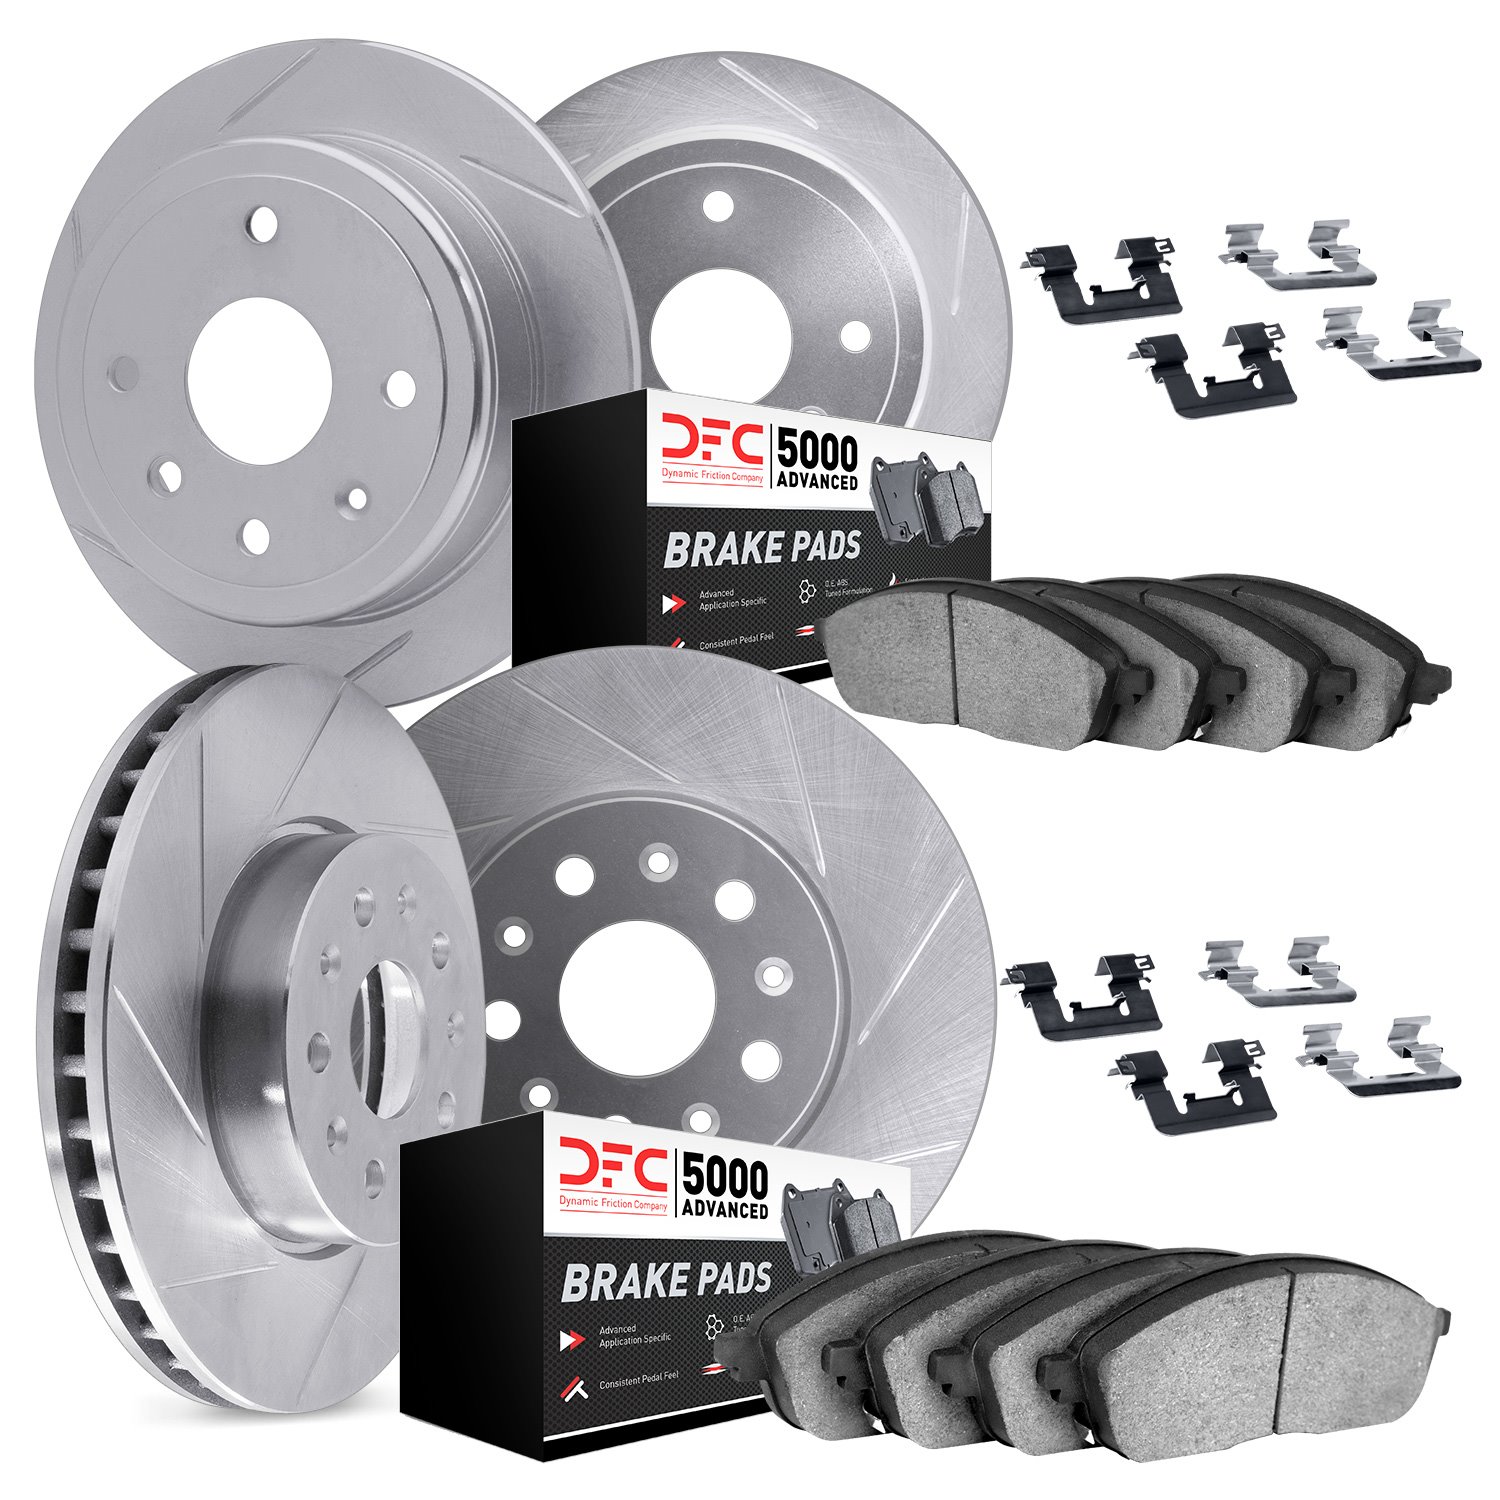 5514-59027 Slotted Brake Rotors w/5000 Advanced Brake Pads Kit & Hardware [Silver], 2001-2002 Acura/Honda, Position: Front and R